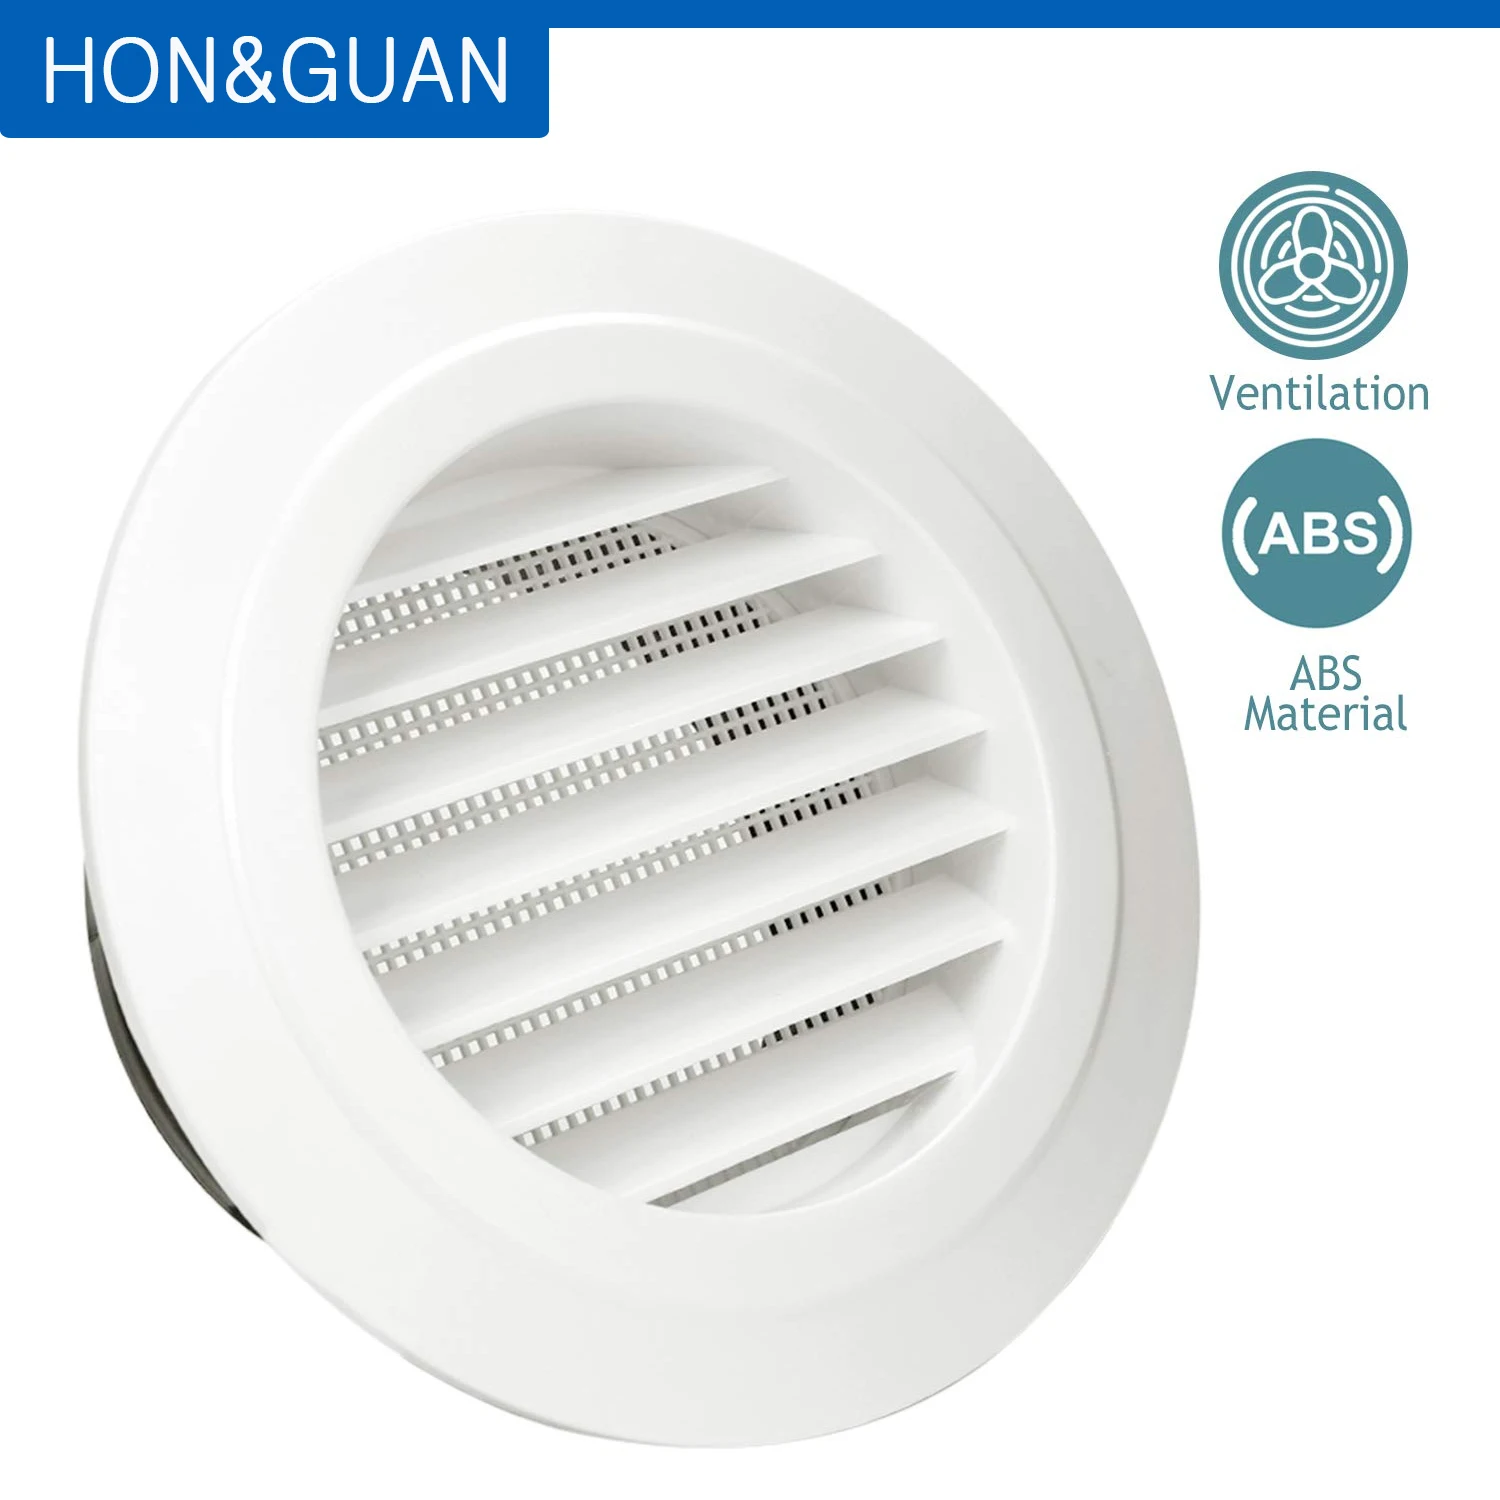 Without Flange Built-in Insect Screen HVAC Vents for Bathroom Air Vent Cover - White Vent Systems 4'' Inch Duct Grill Cover 6.9 x 6.7 Kitchen Air Vent Louver Home Office 